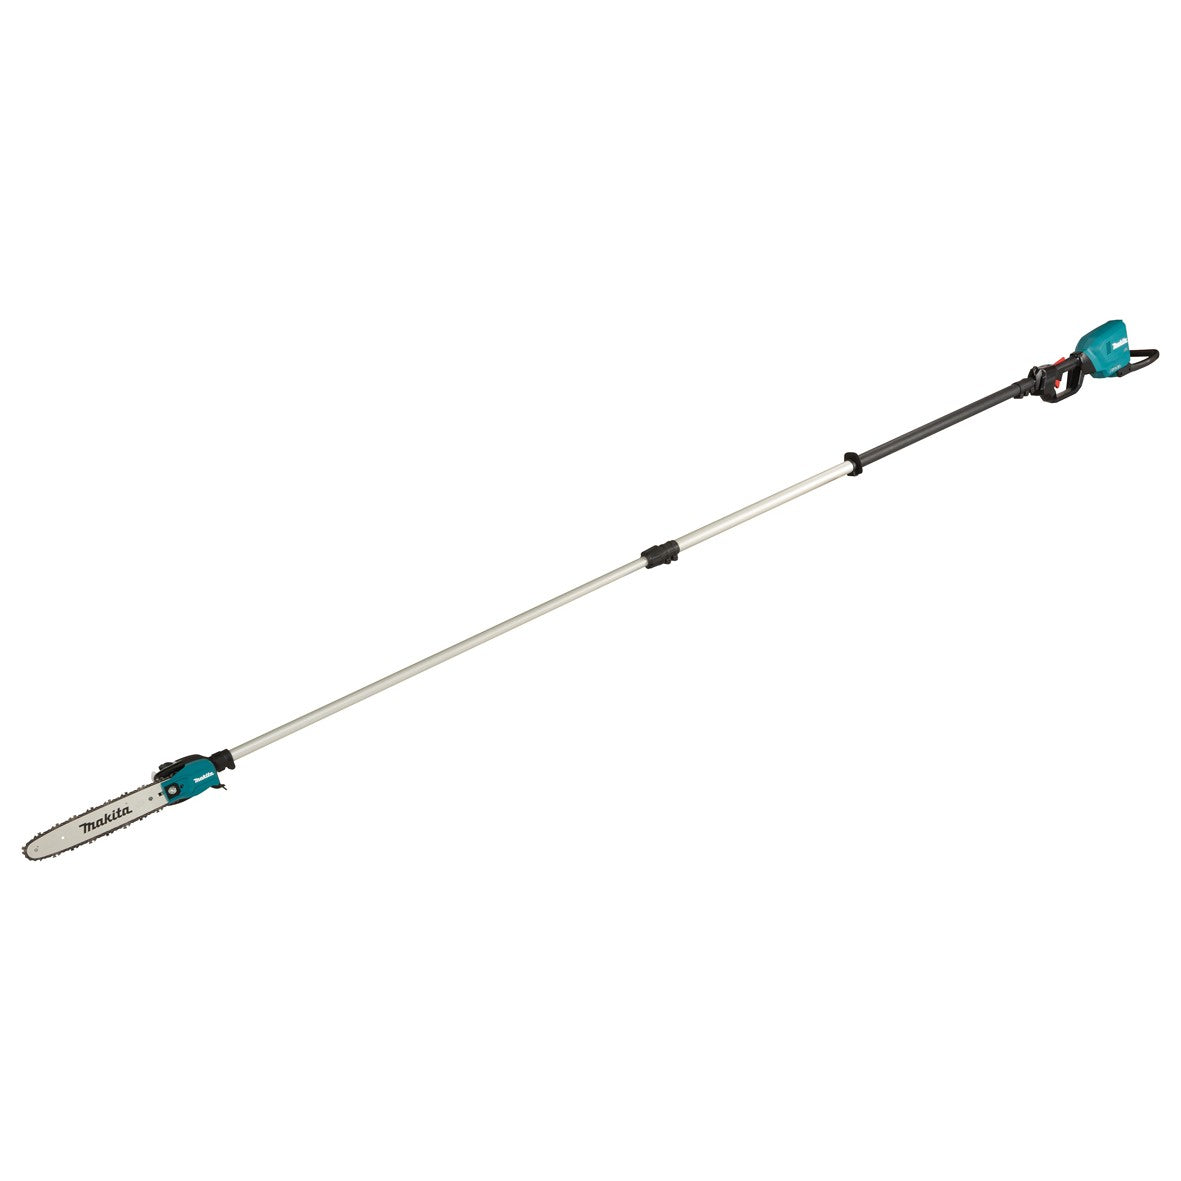 36V (18V x 2) Brushless 300mm Extension Pole Saw Bare (Tool Only) DUA301Z by Makita